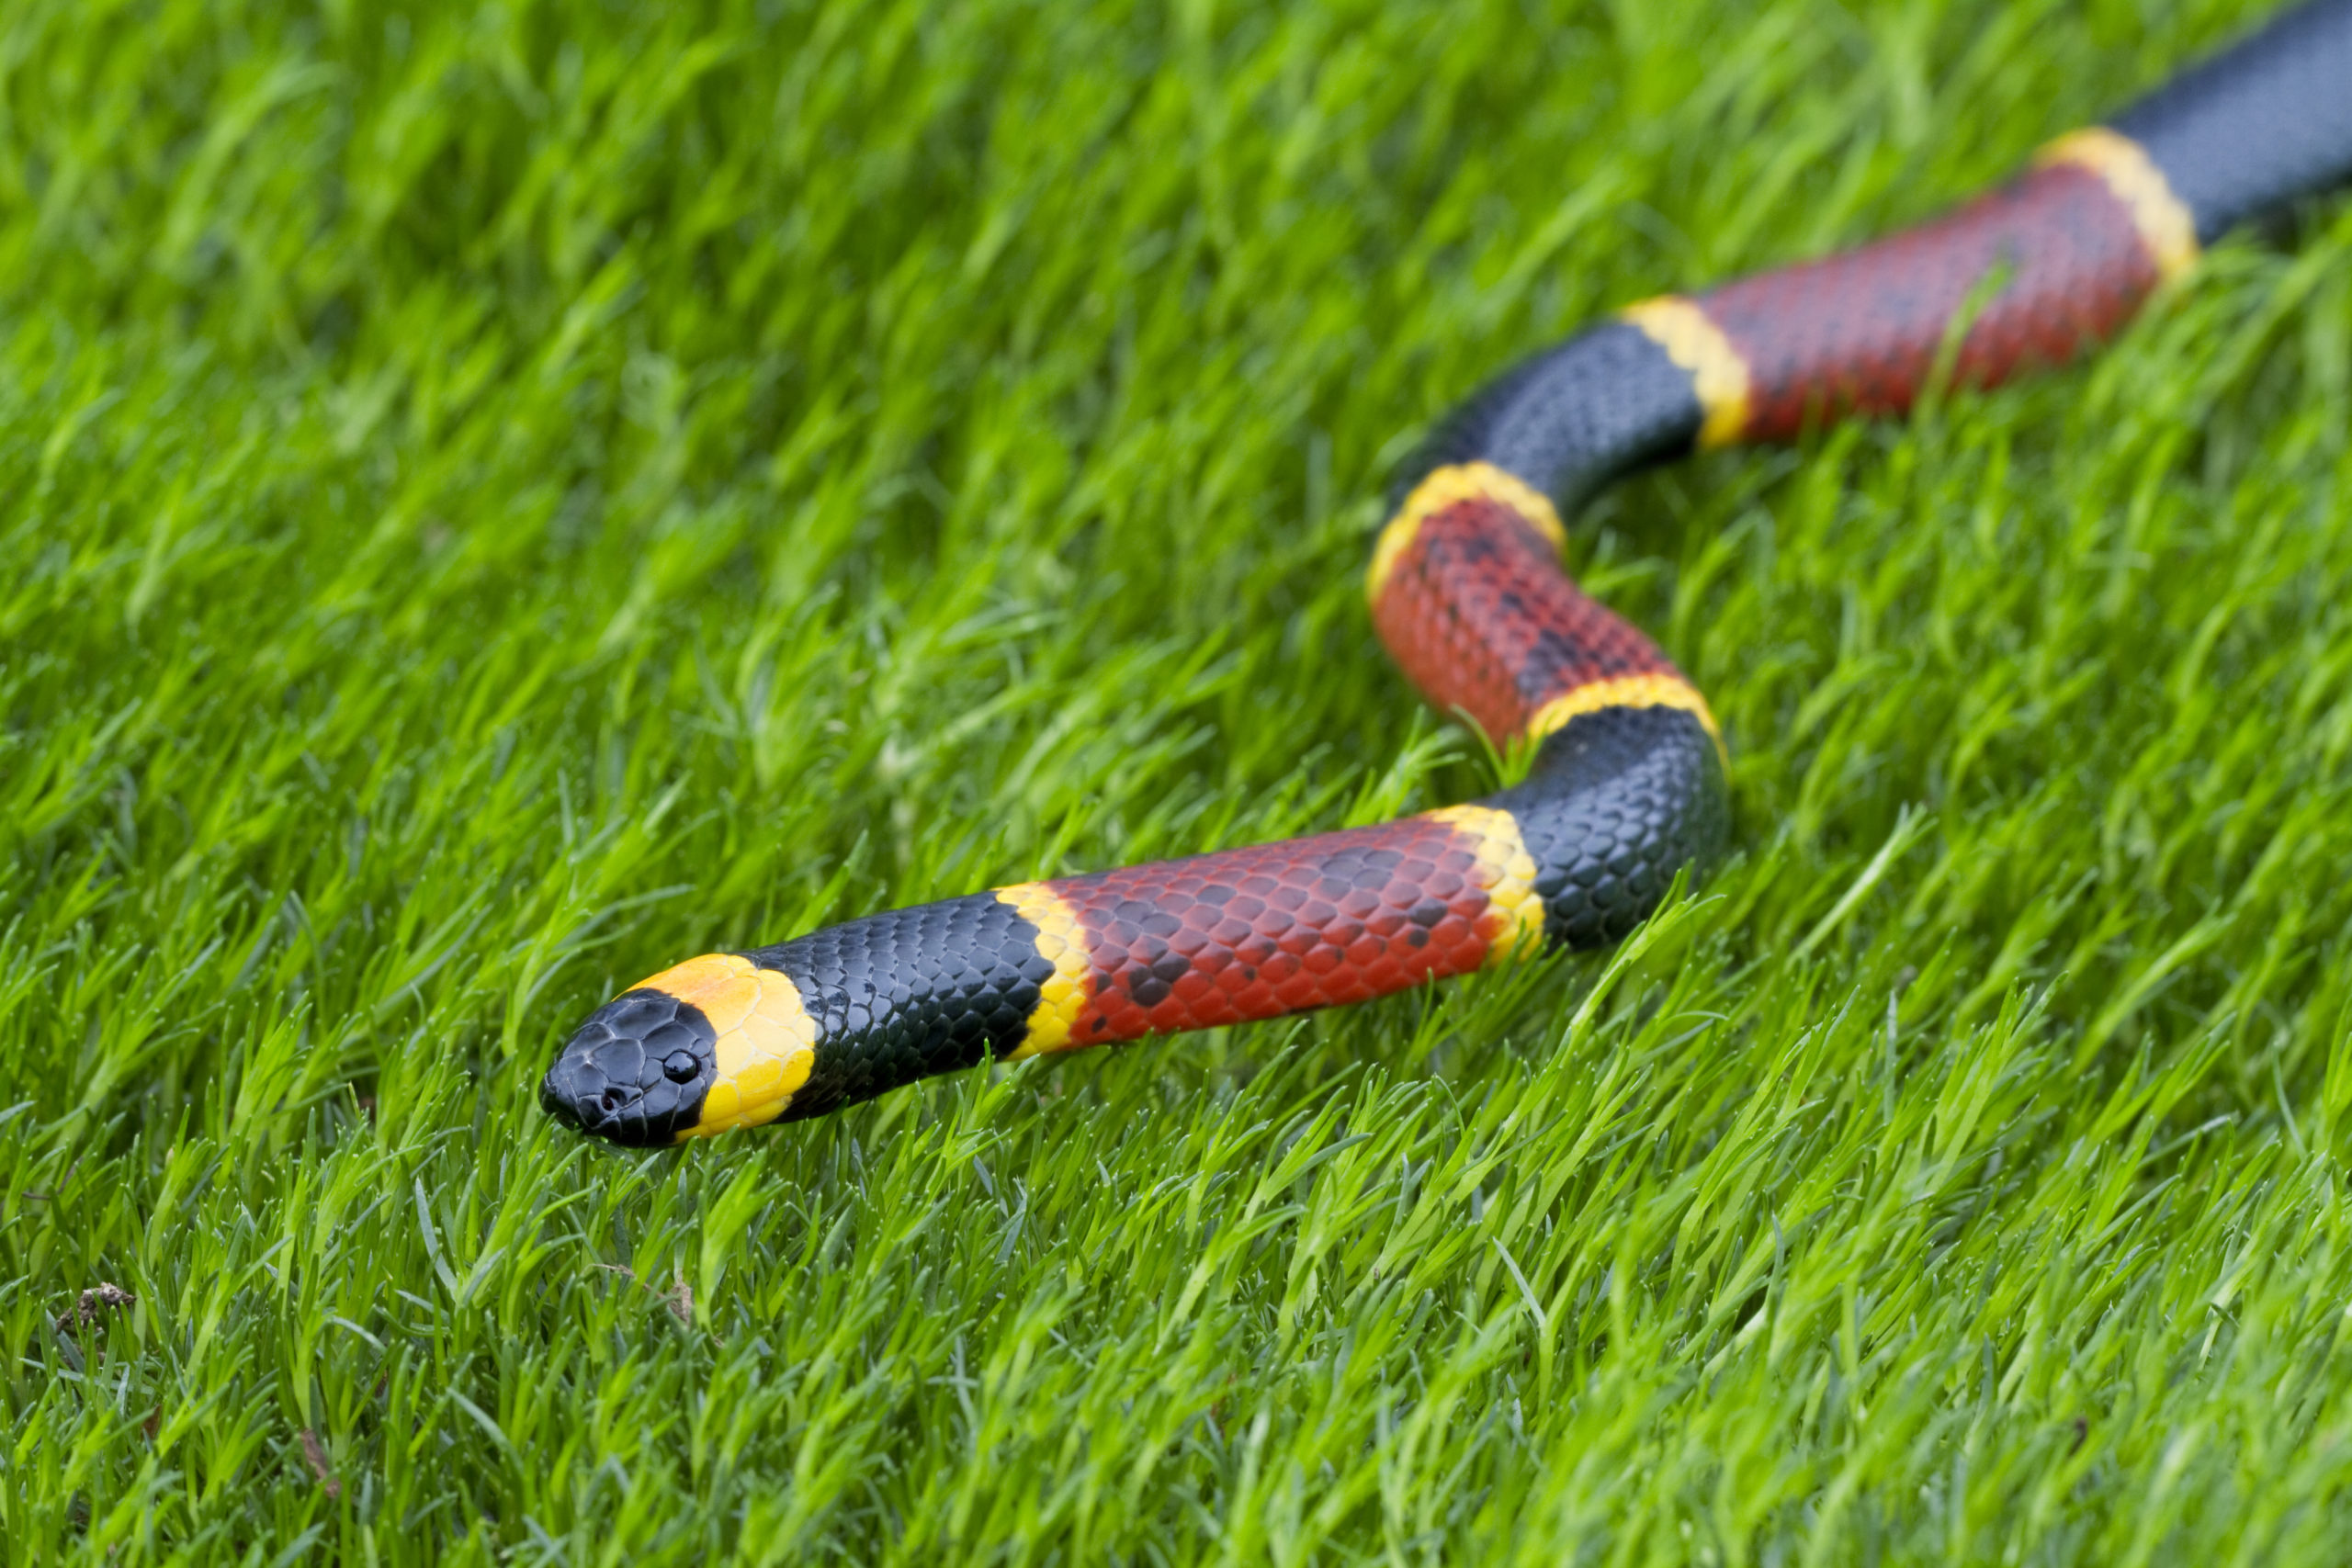 The highly venomous eastern coral snake on some grass.